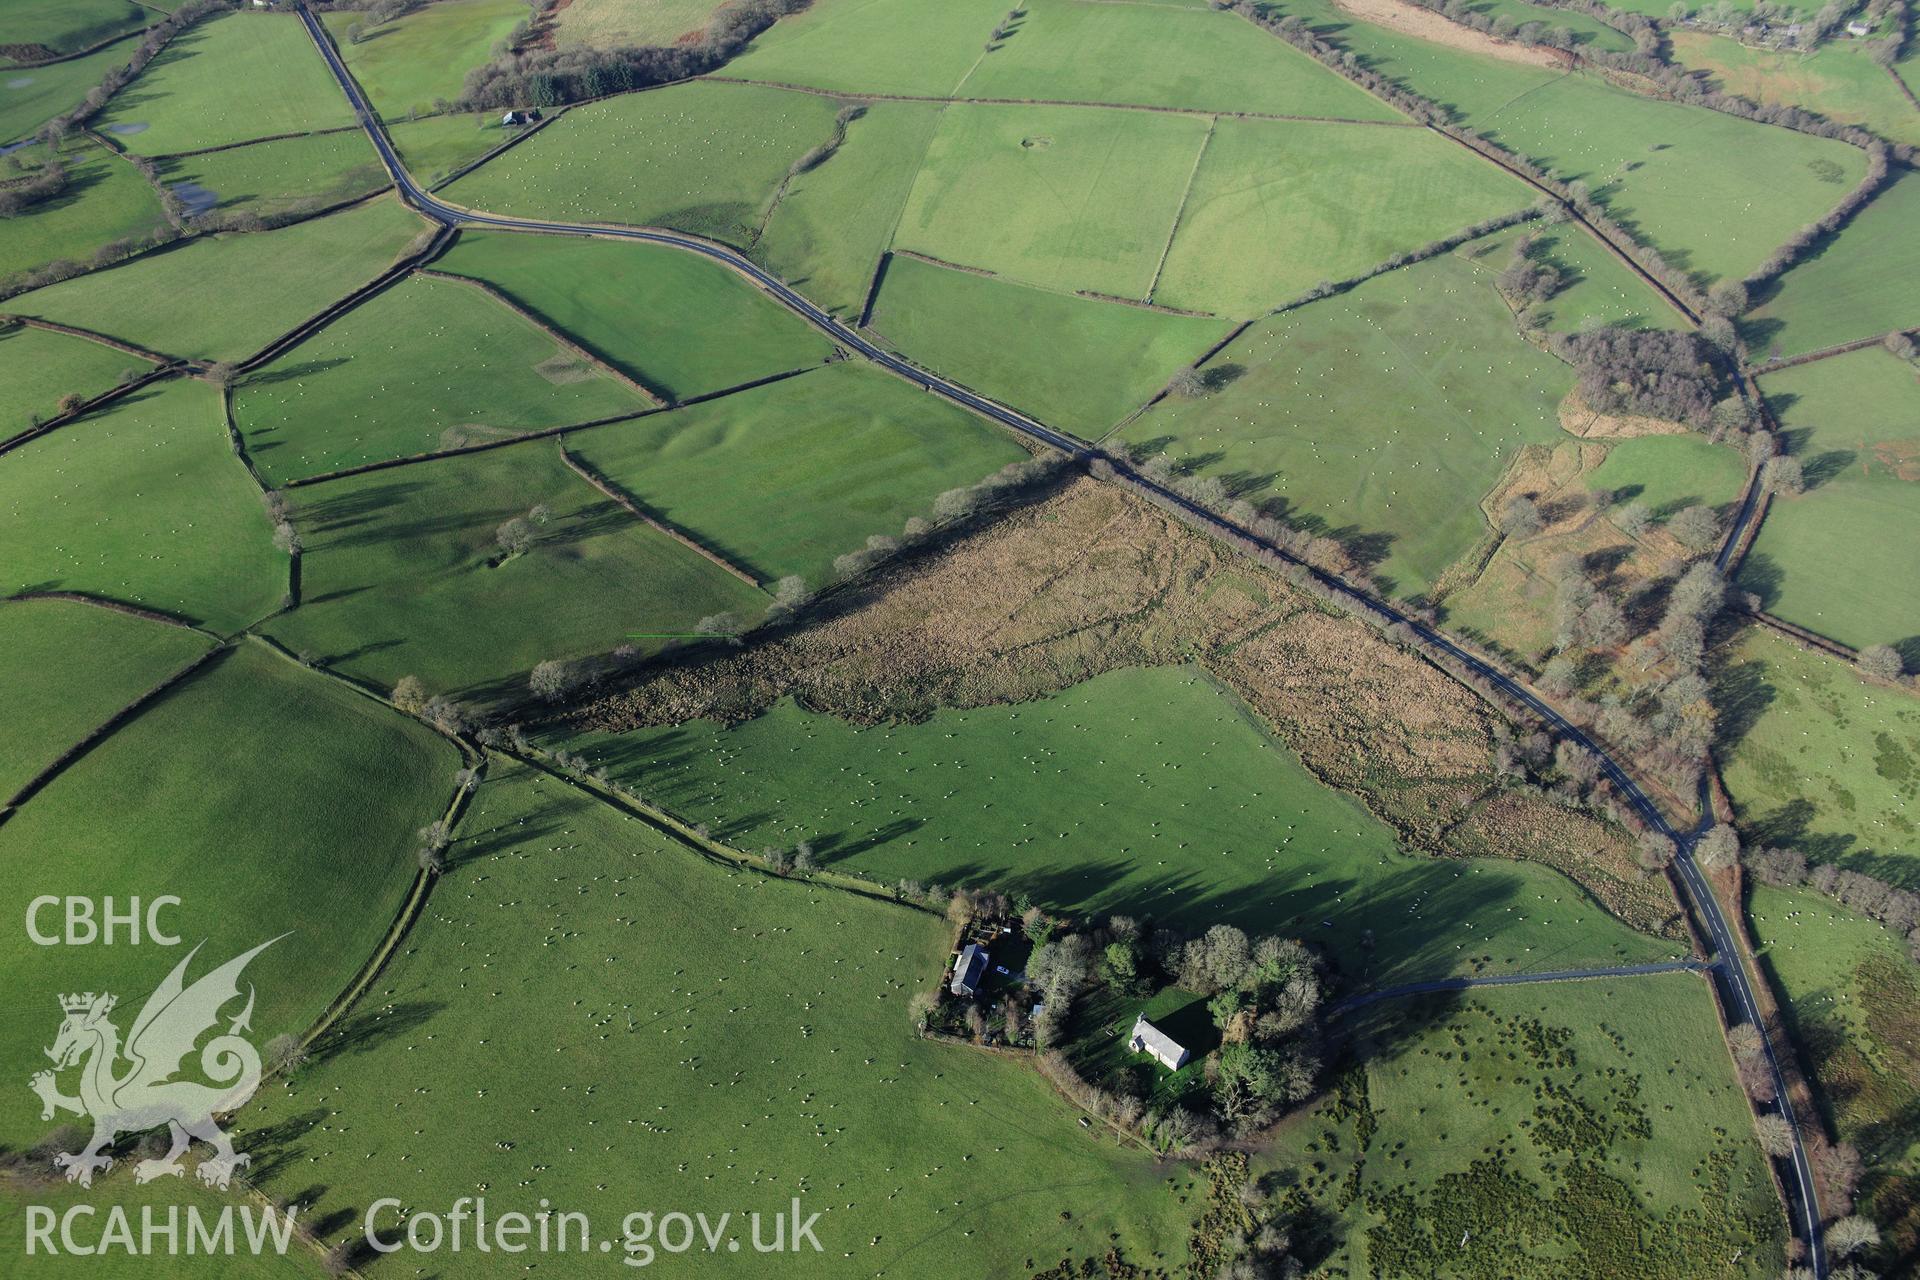 RCAHMW colour oblique photograph of Llanlleonfel Church, wide view showing earthworks (NPRN 421624). Taken by Toby Driver on 23/11/2012.